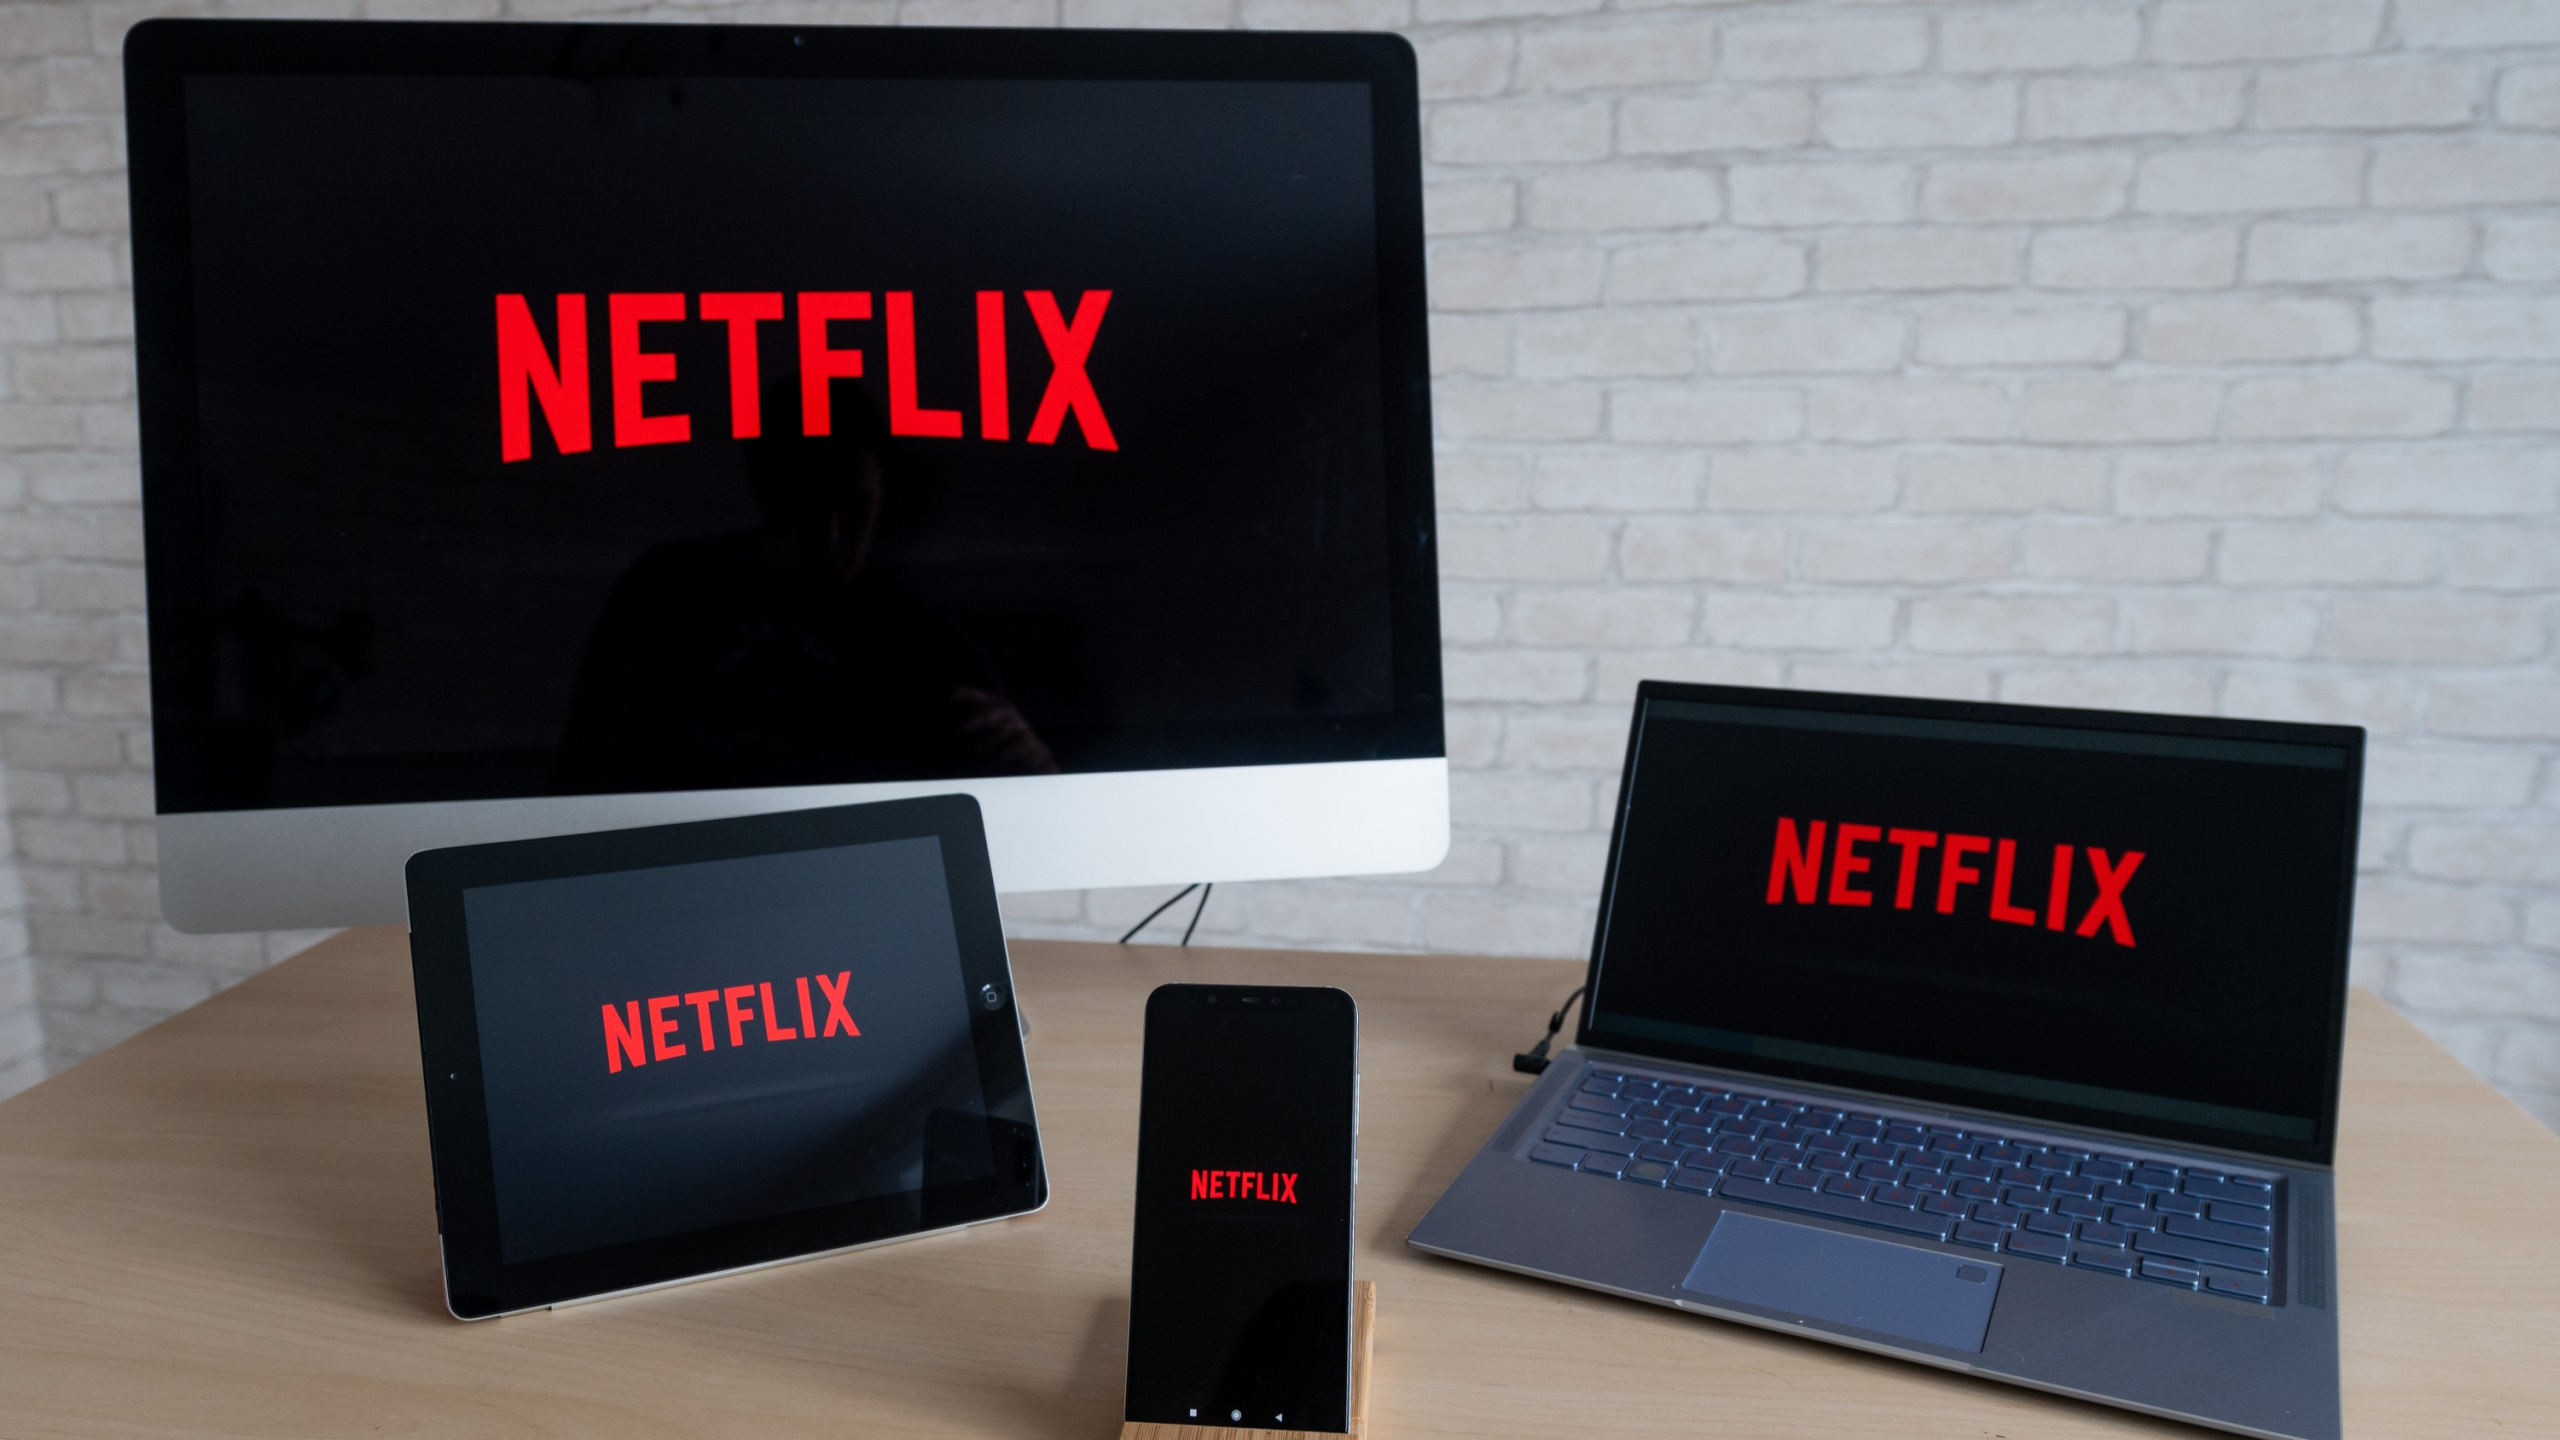 Netflix plans to raise the price of its services, but is reportedly waiting for the actors’ strike to end first